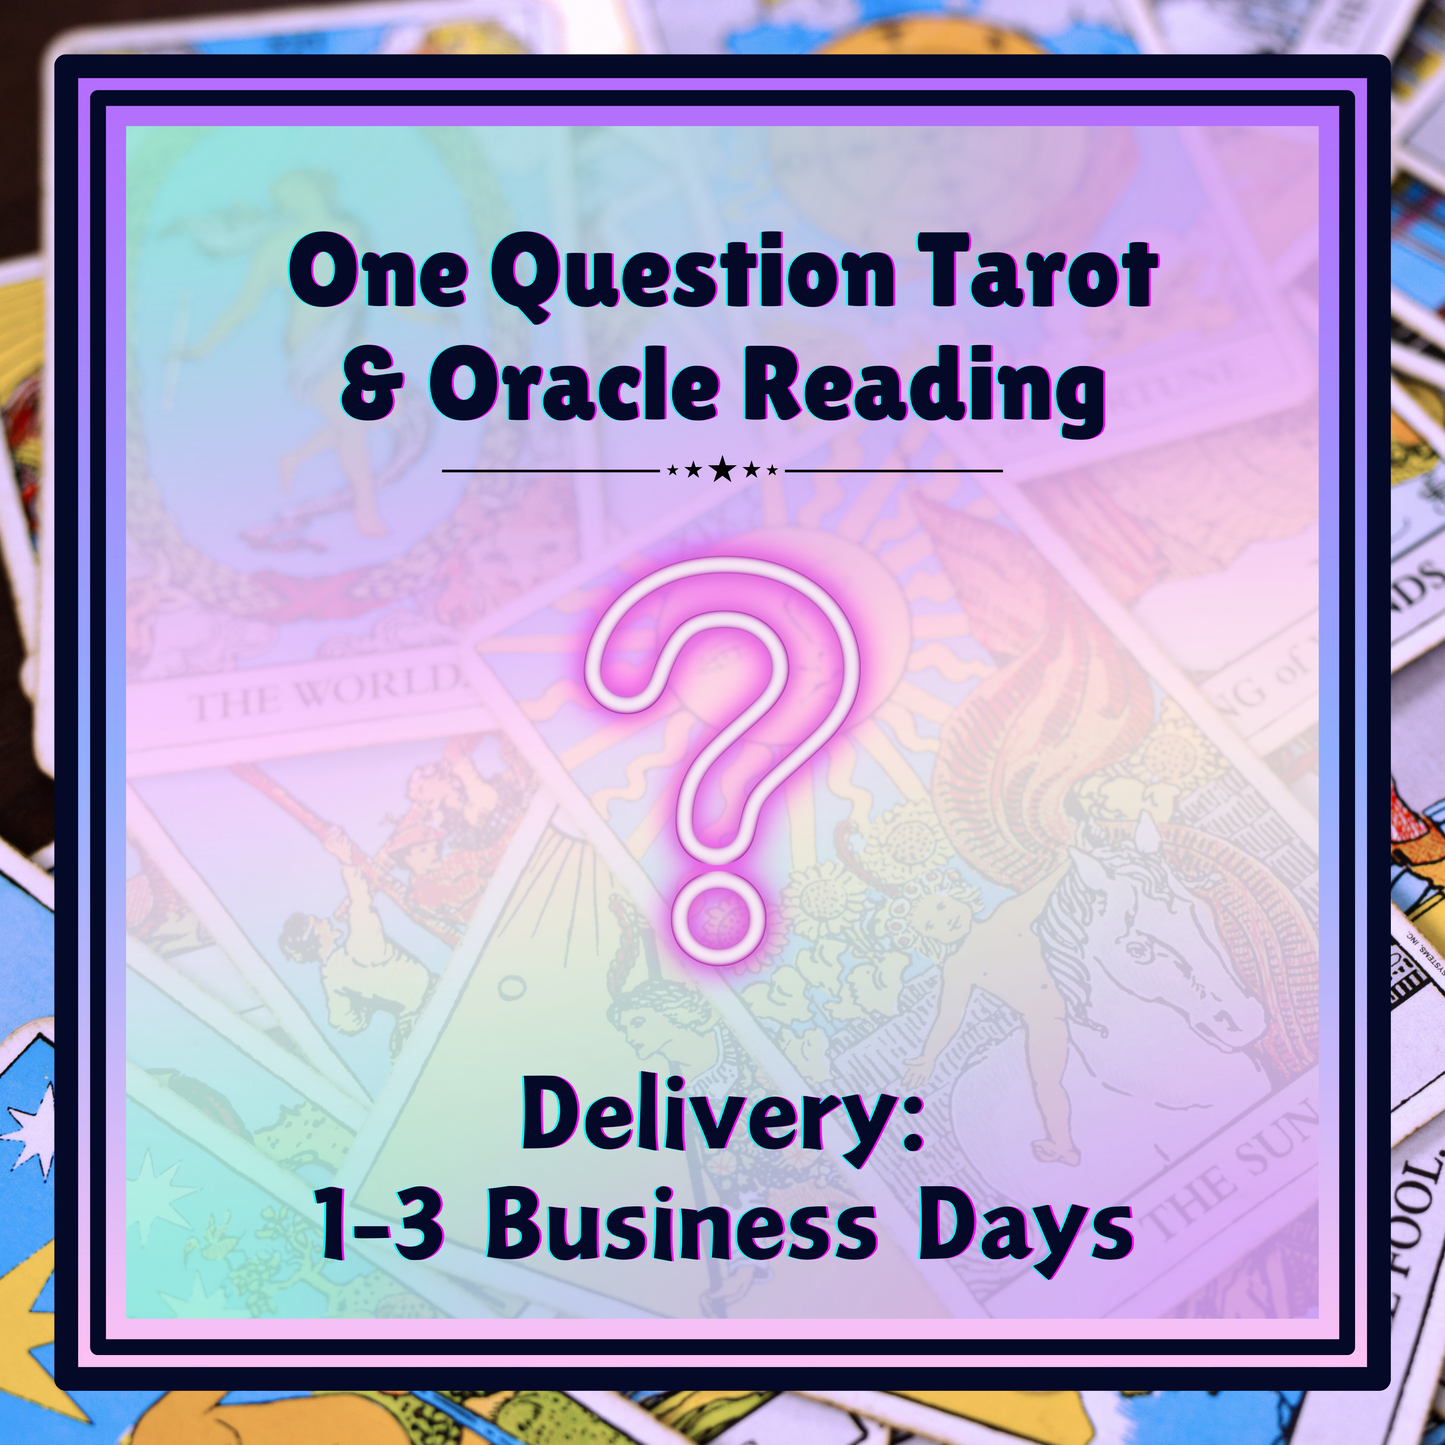 One Question Tarot & Oracle Reading